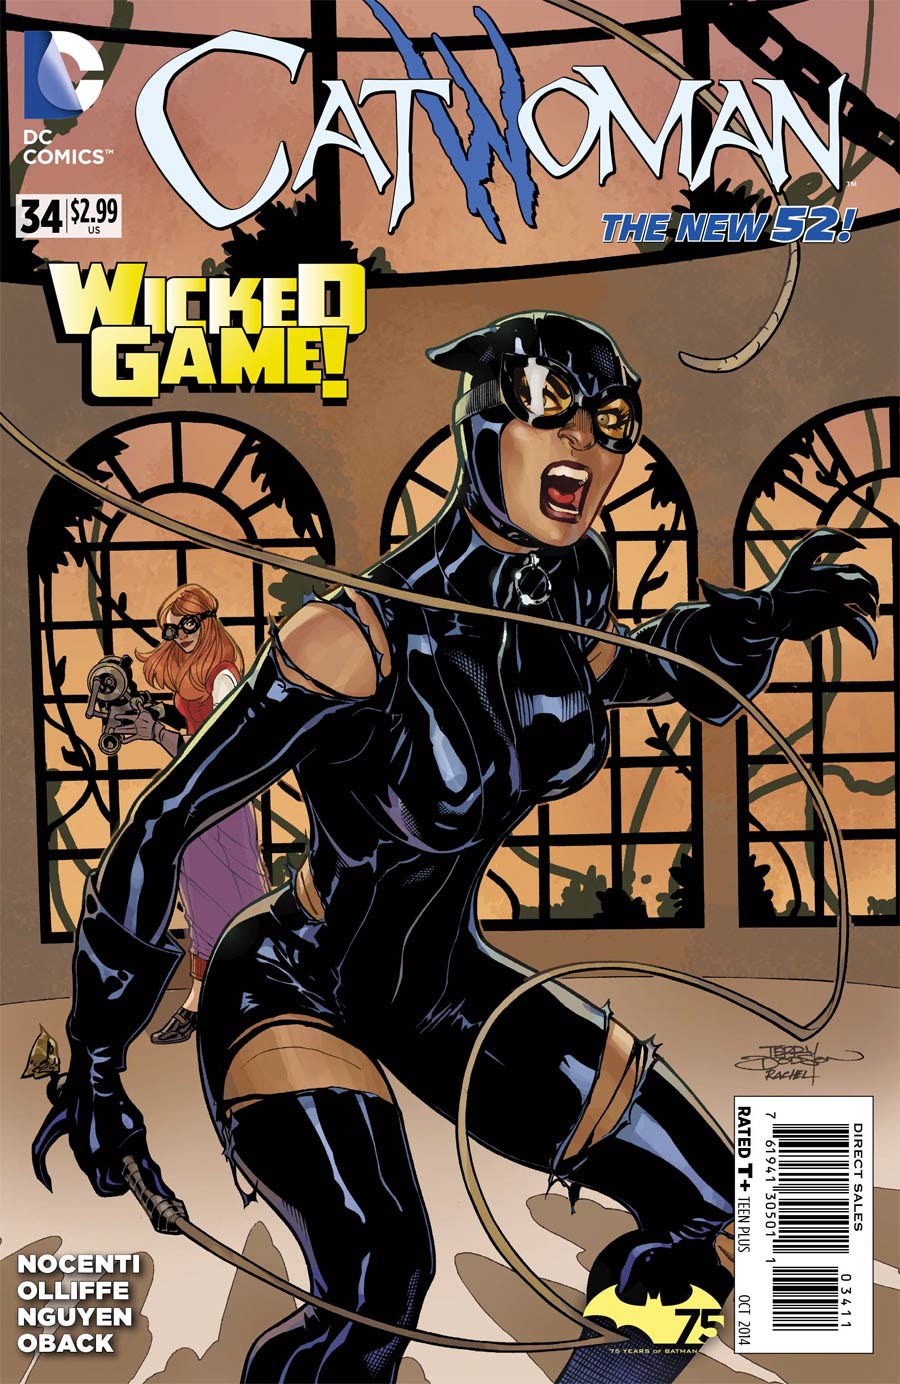 Catwoman Vol 4 #34 Cover A Regular Terry Dodson Cover